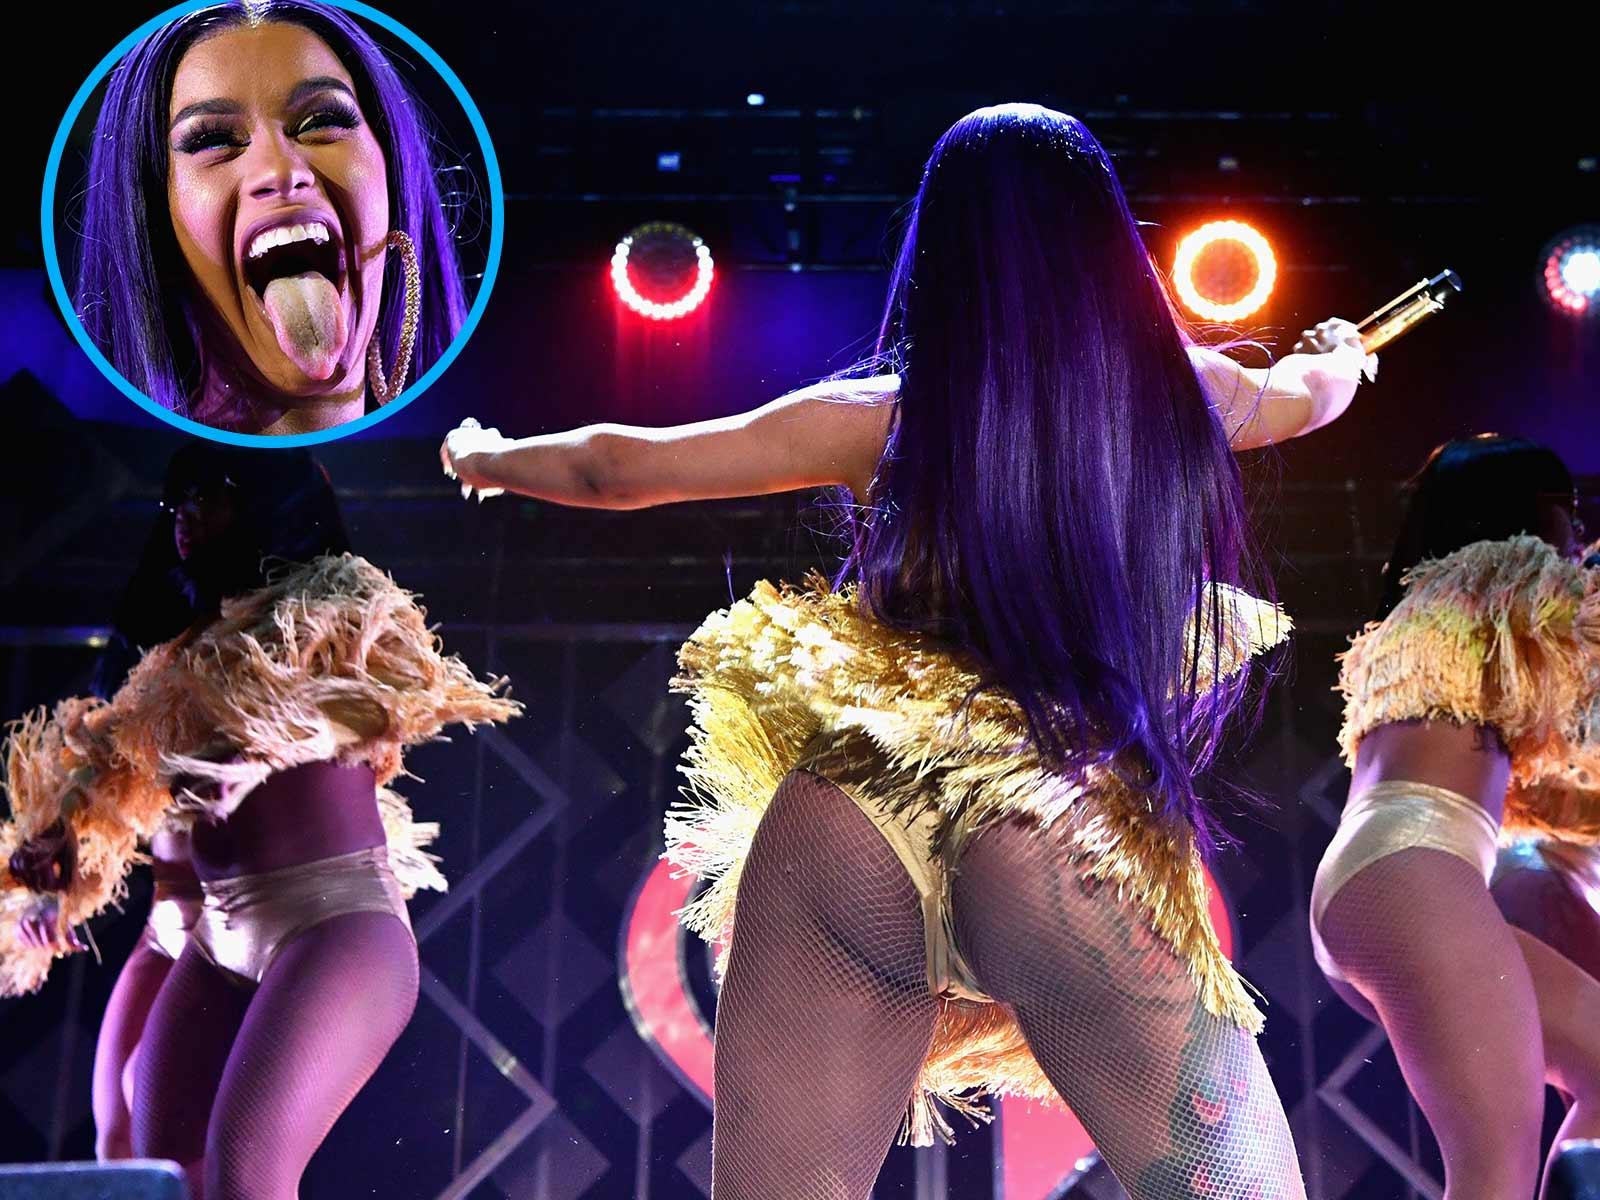 Cardi B Sleighs With Booty on Display During Annual Jingle Ball Concert